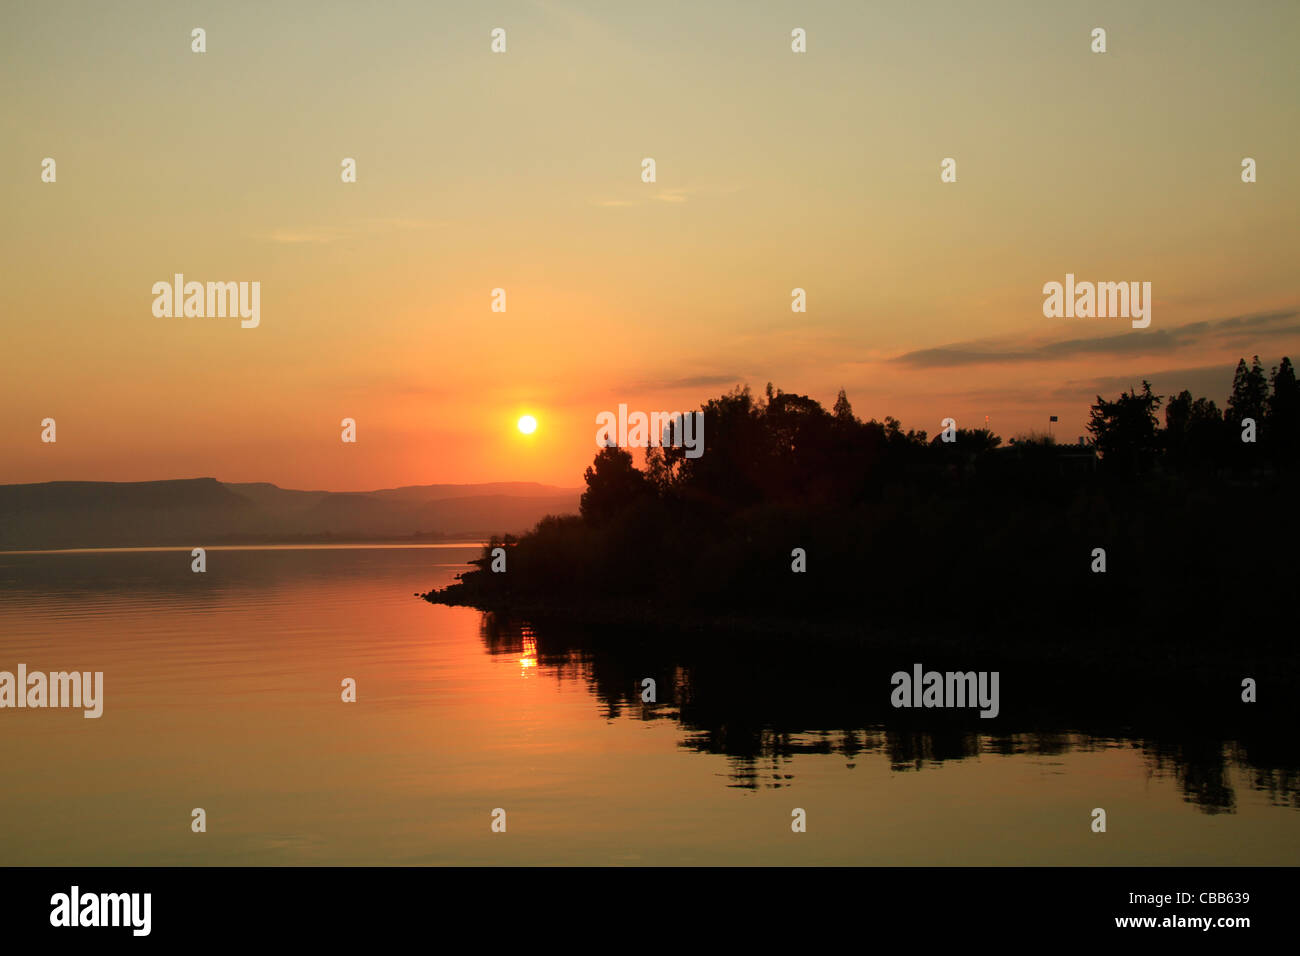 Israel, sunset over the Sea of Galilee at Capernaum Stock Photo